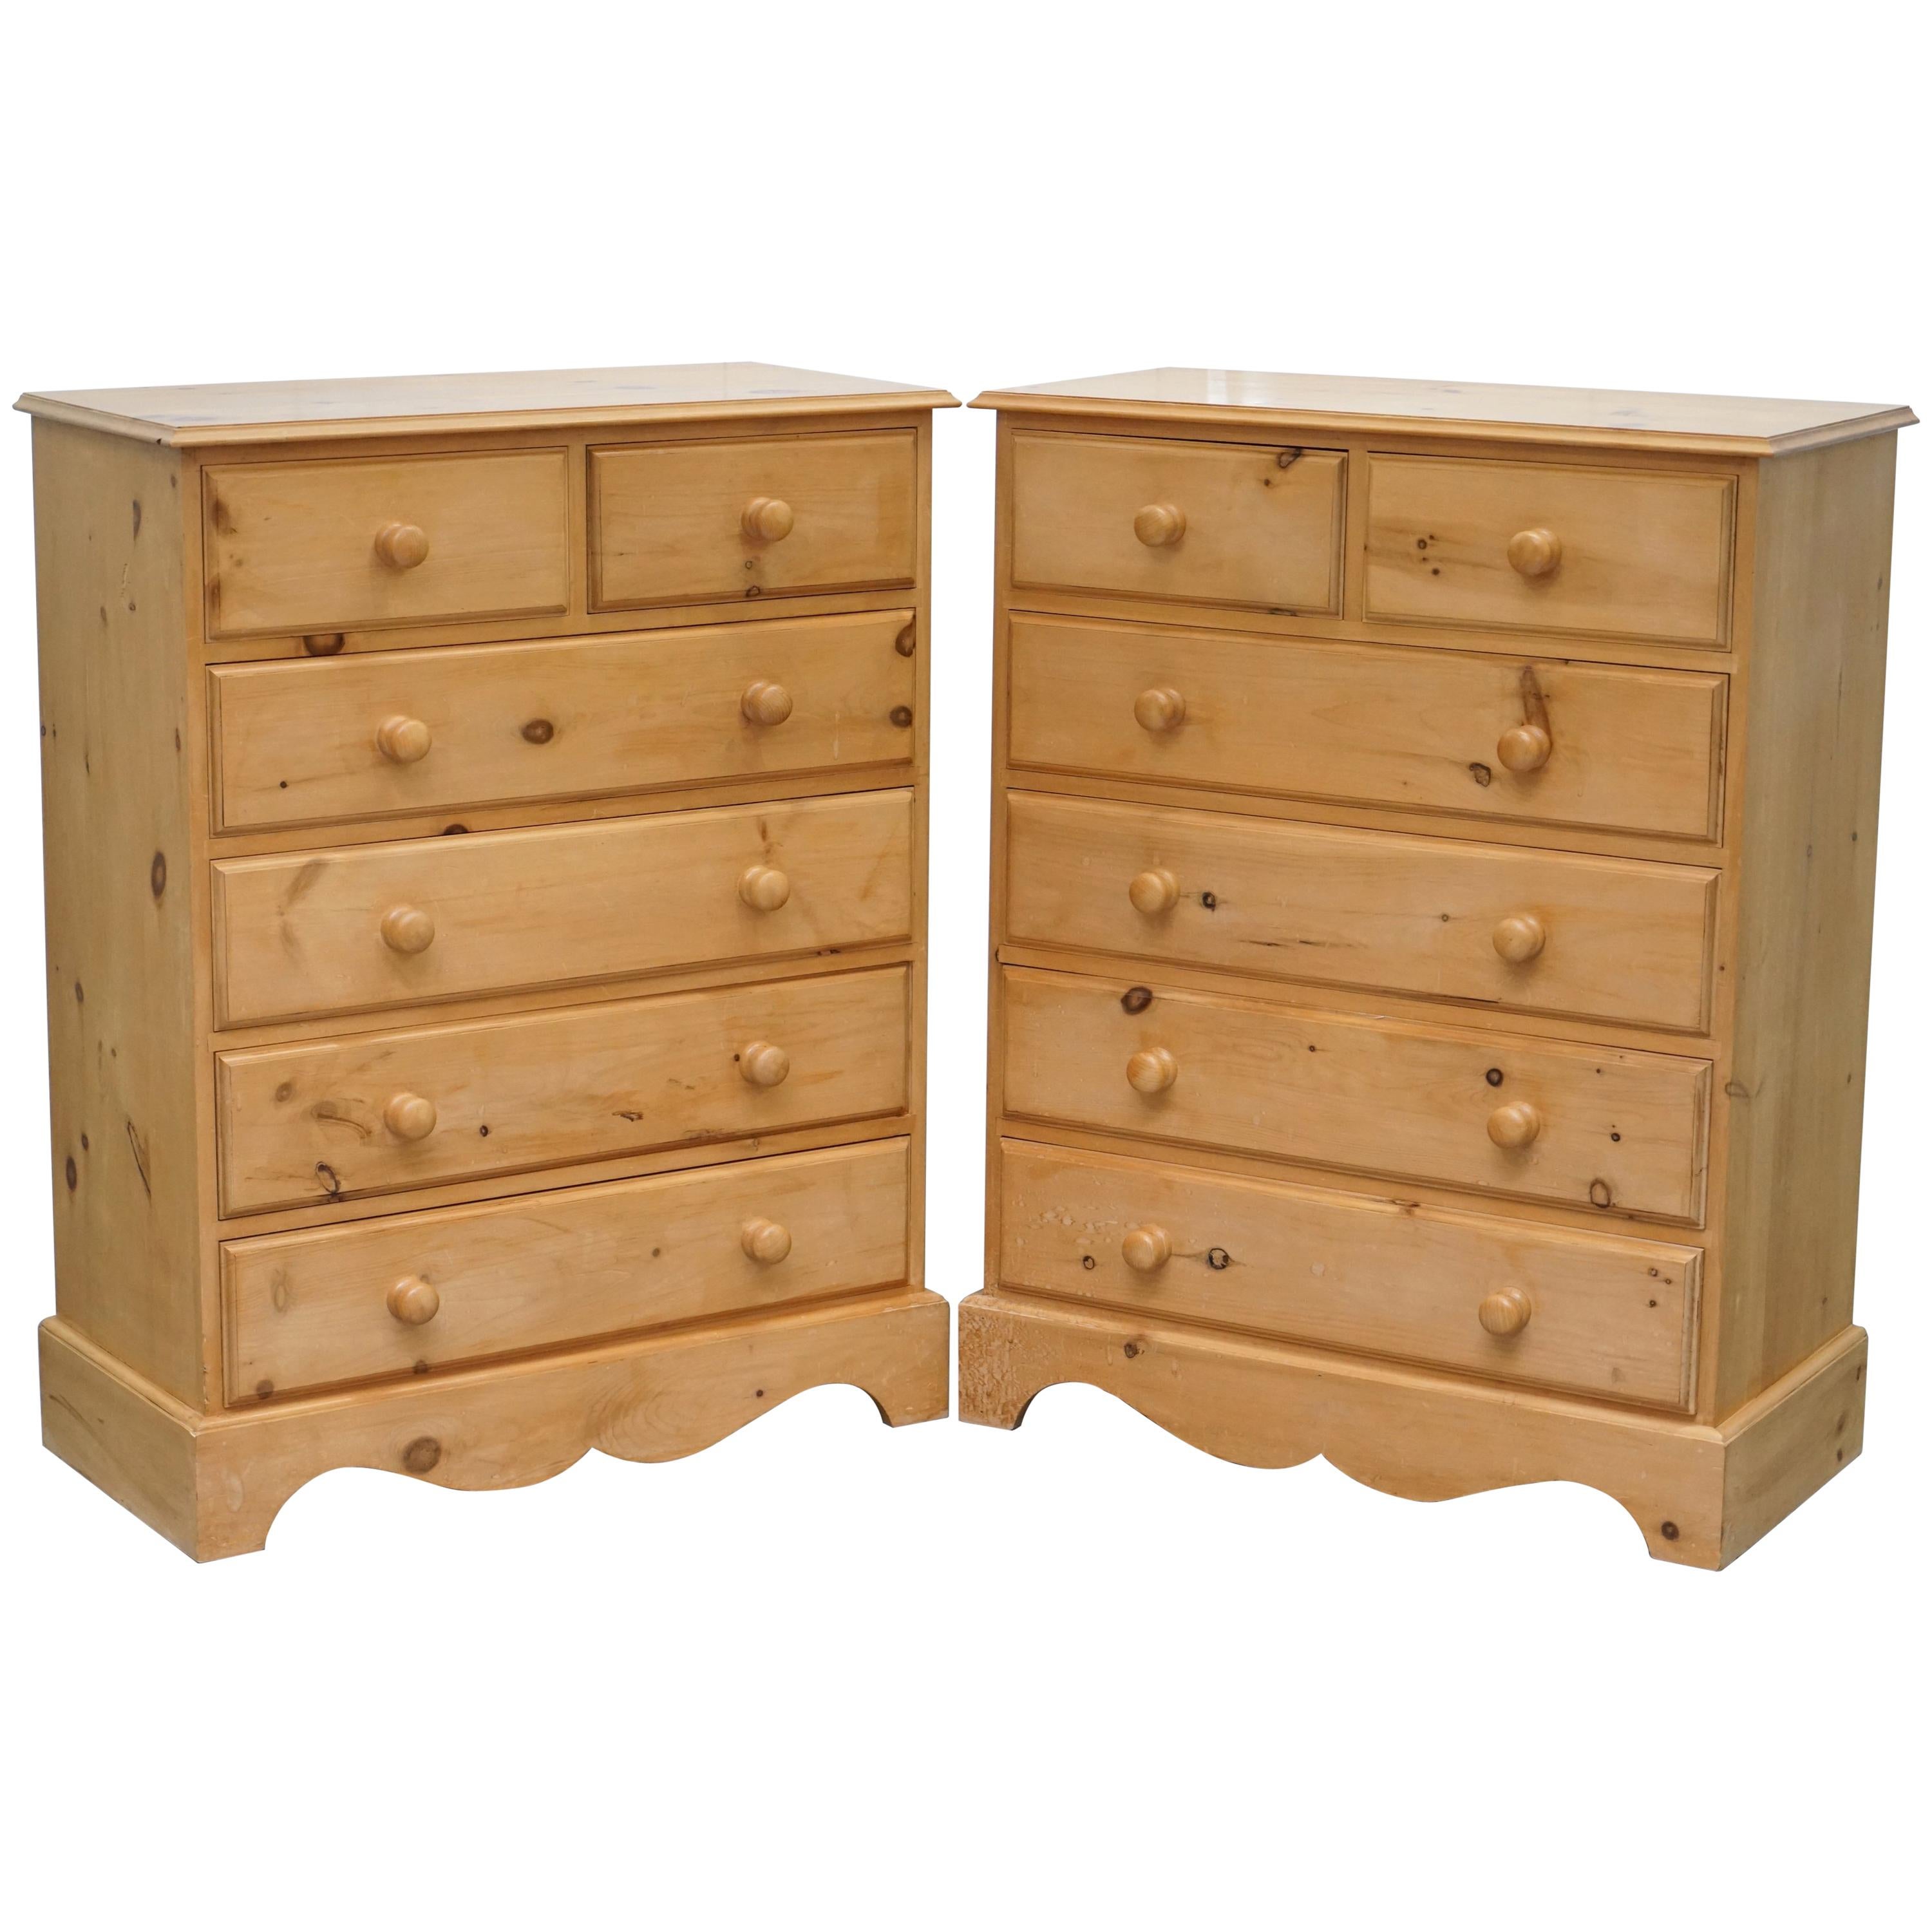 Lovely Matching Pair of 115cm Tall Solid Pine 6 Drawer Tall Chests of Drawers 